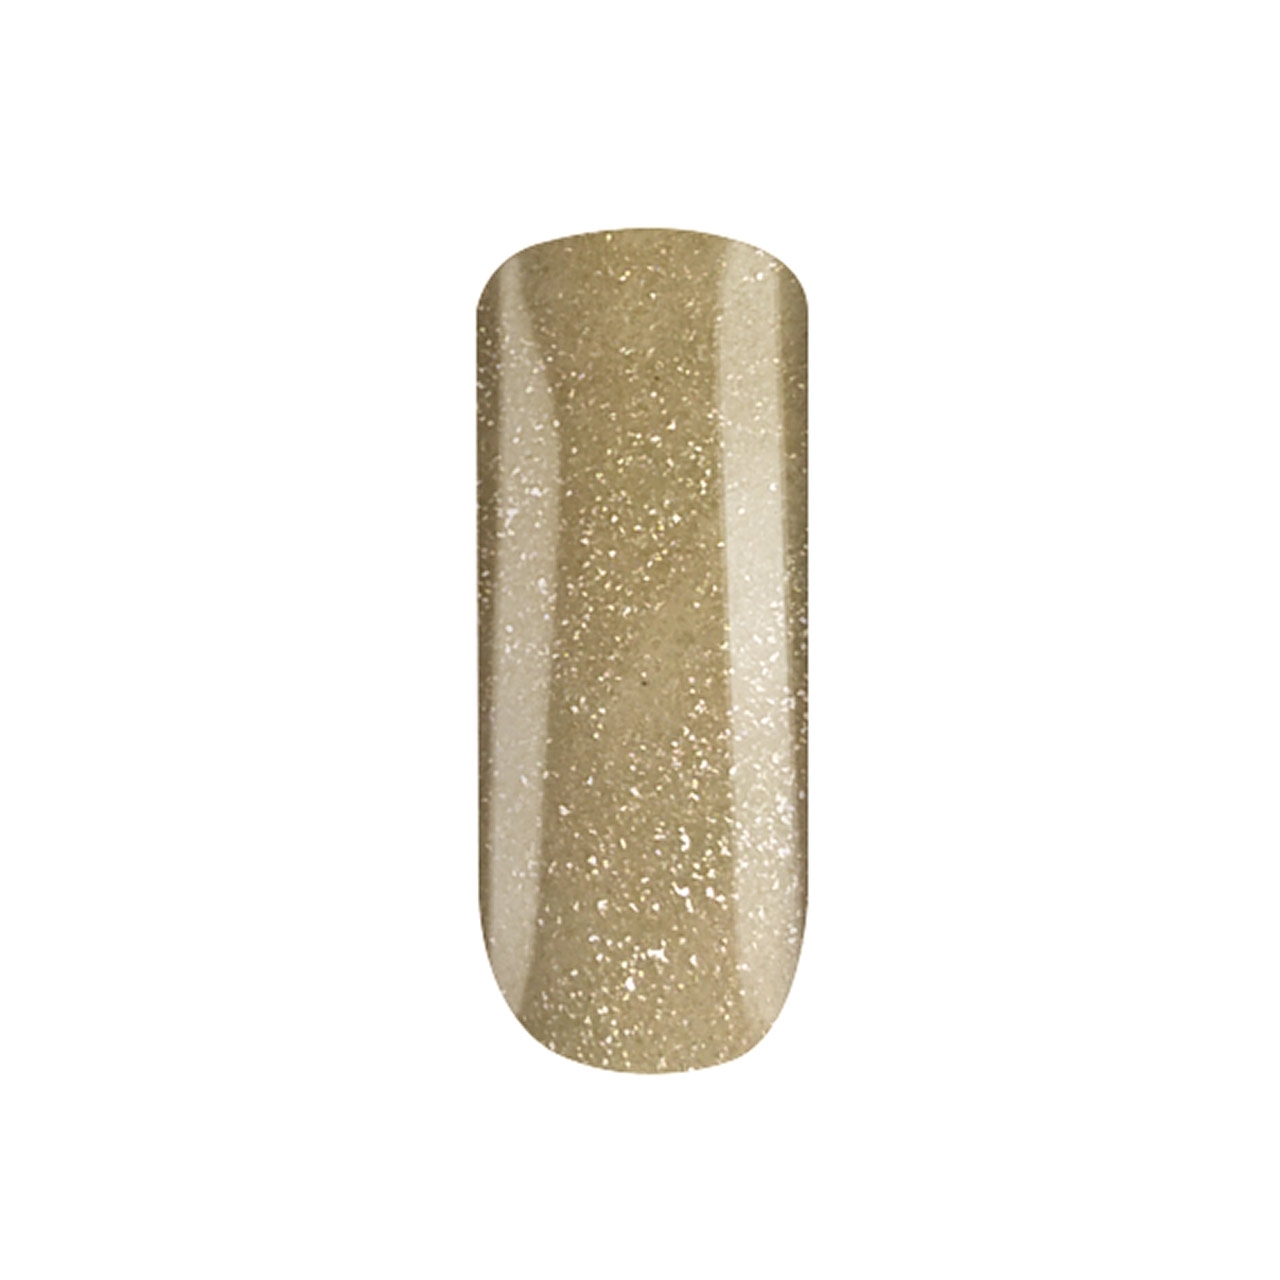 BAEHR BEAUTY CONCEPT - NAILS Nagellack champagne 11 ml